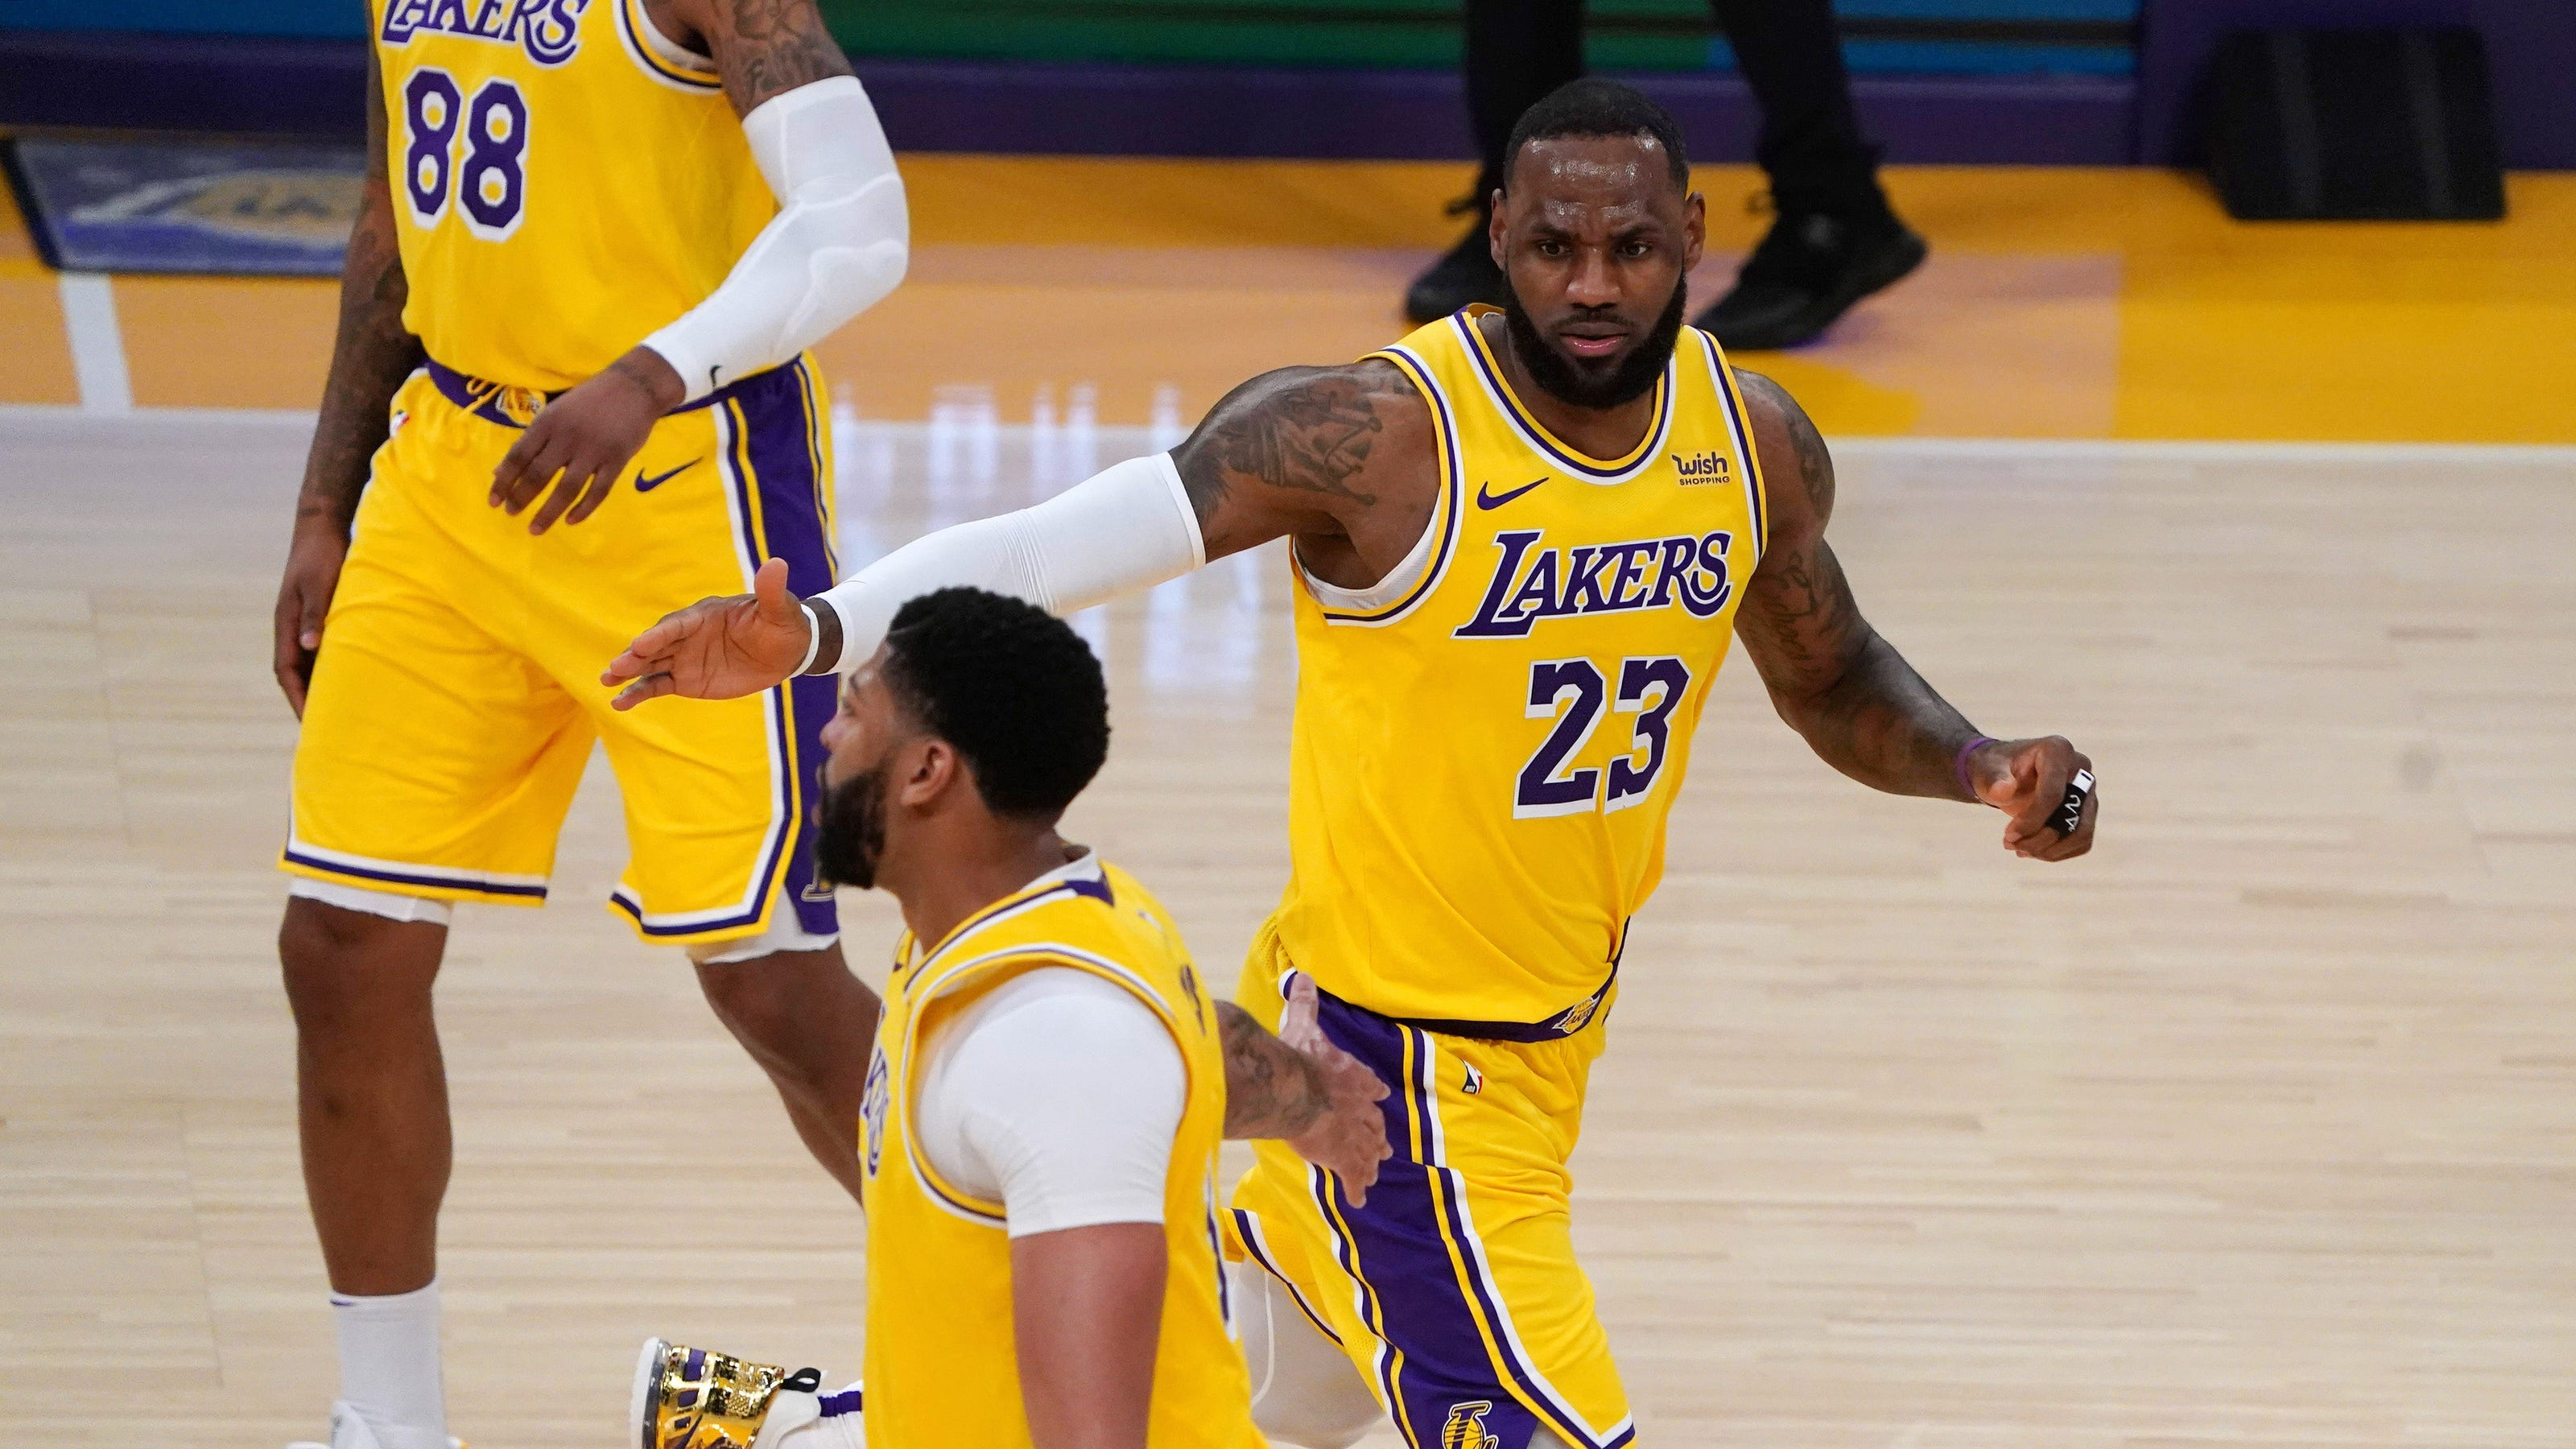 39 HQ Pictures Nba Tv Ratings Bubble : Record-Low NBA Finals Ratings Can't Burst the League's ...